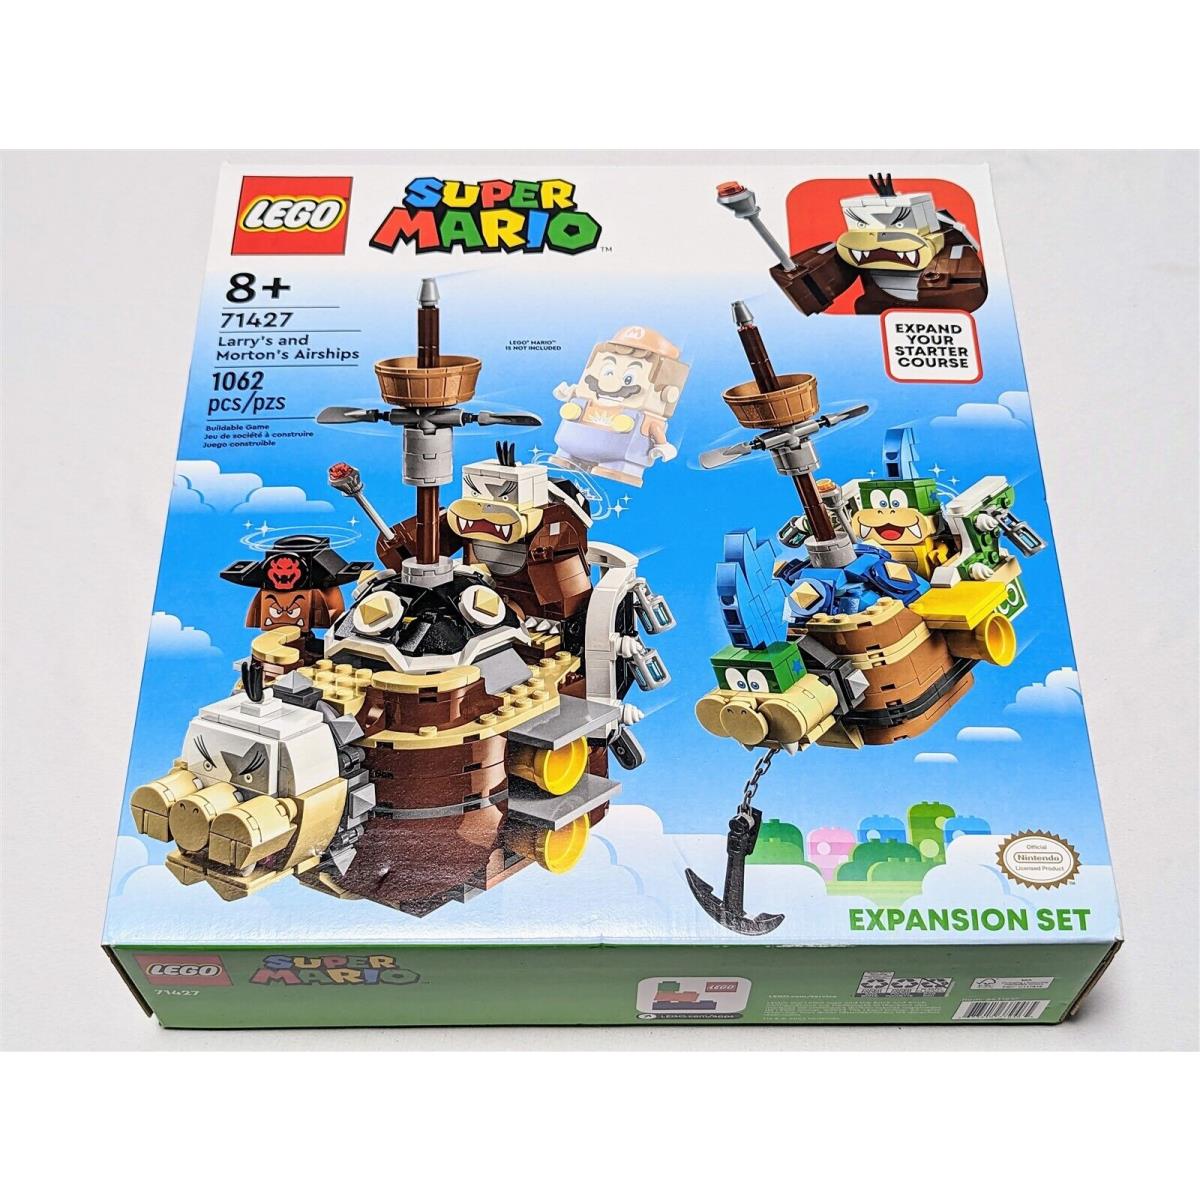 Lego 71427 Super Mario Larry s and Morton s Airships Buildable Expansion Toy Set